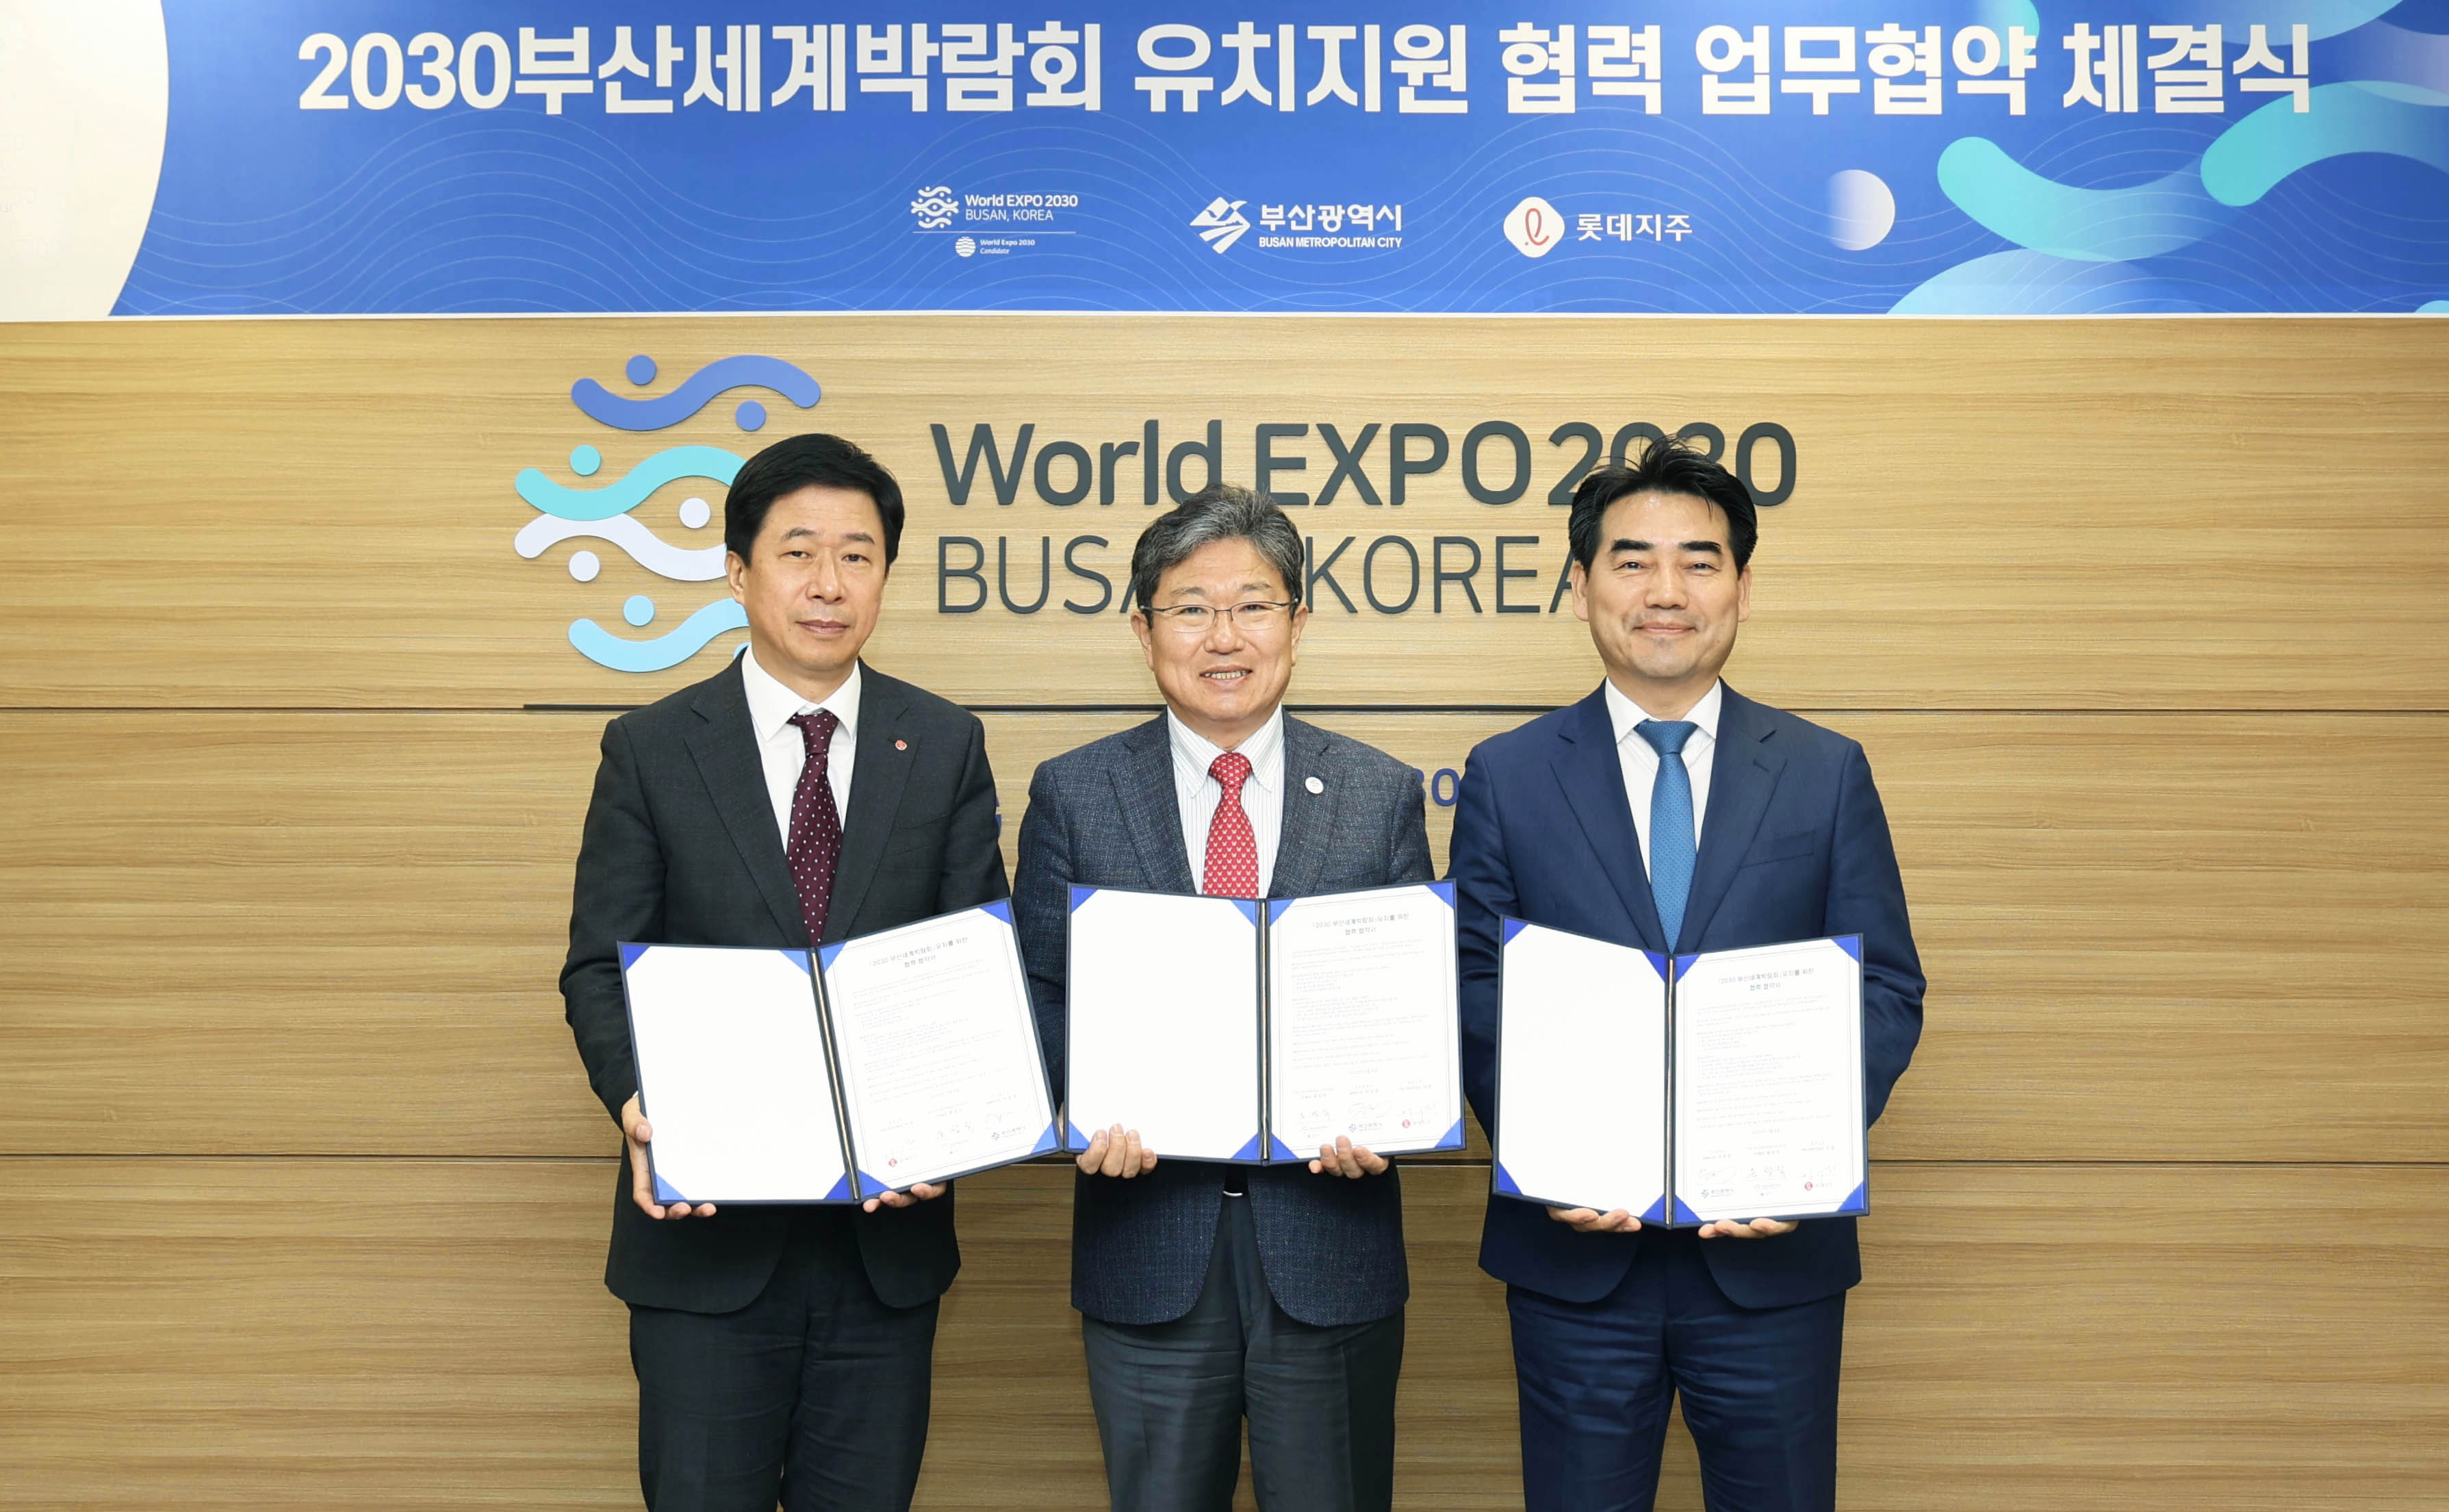 World Expo 2030 Busan Bid Committee signs MOU with Busan City and Lotte for joint promotion Image 0